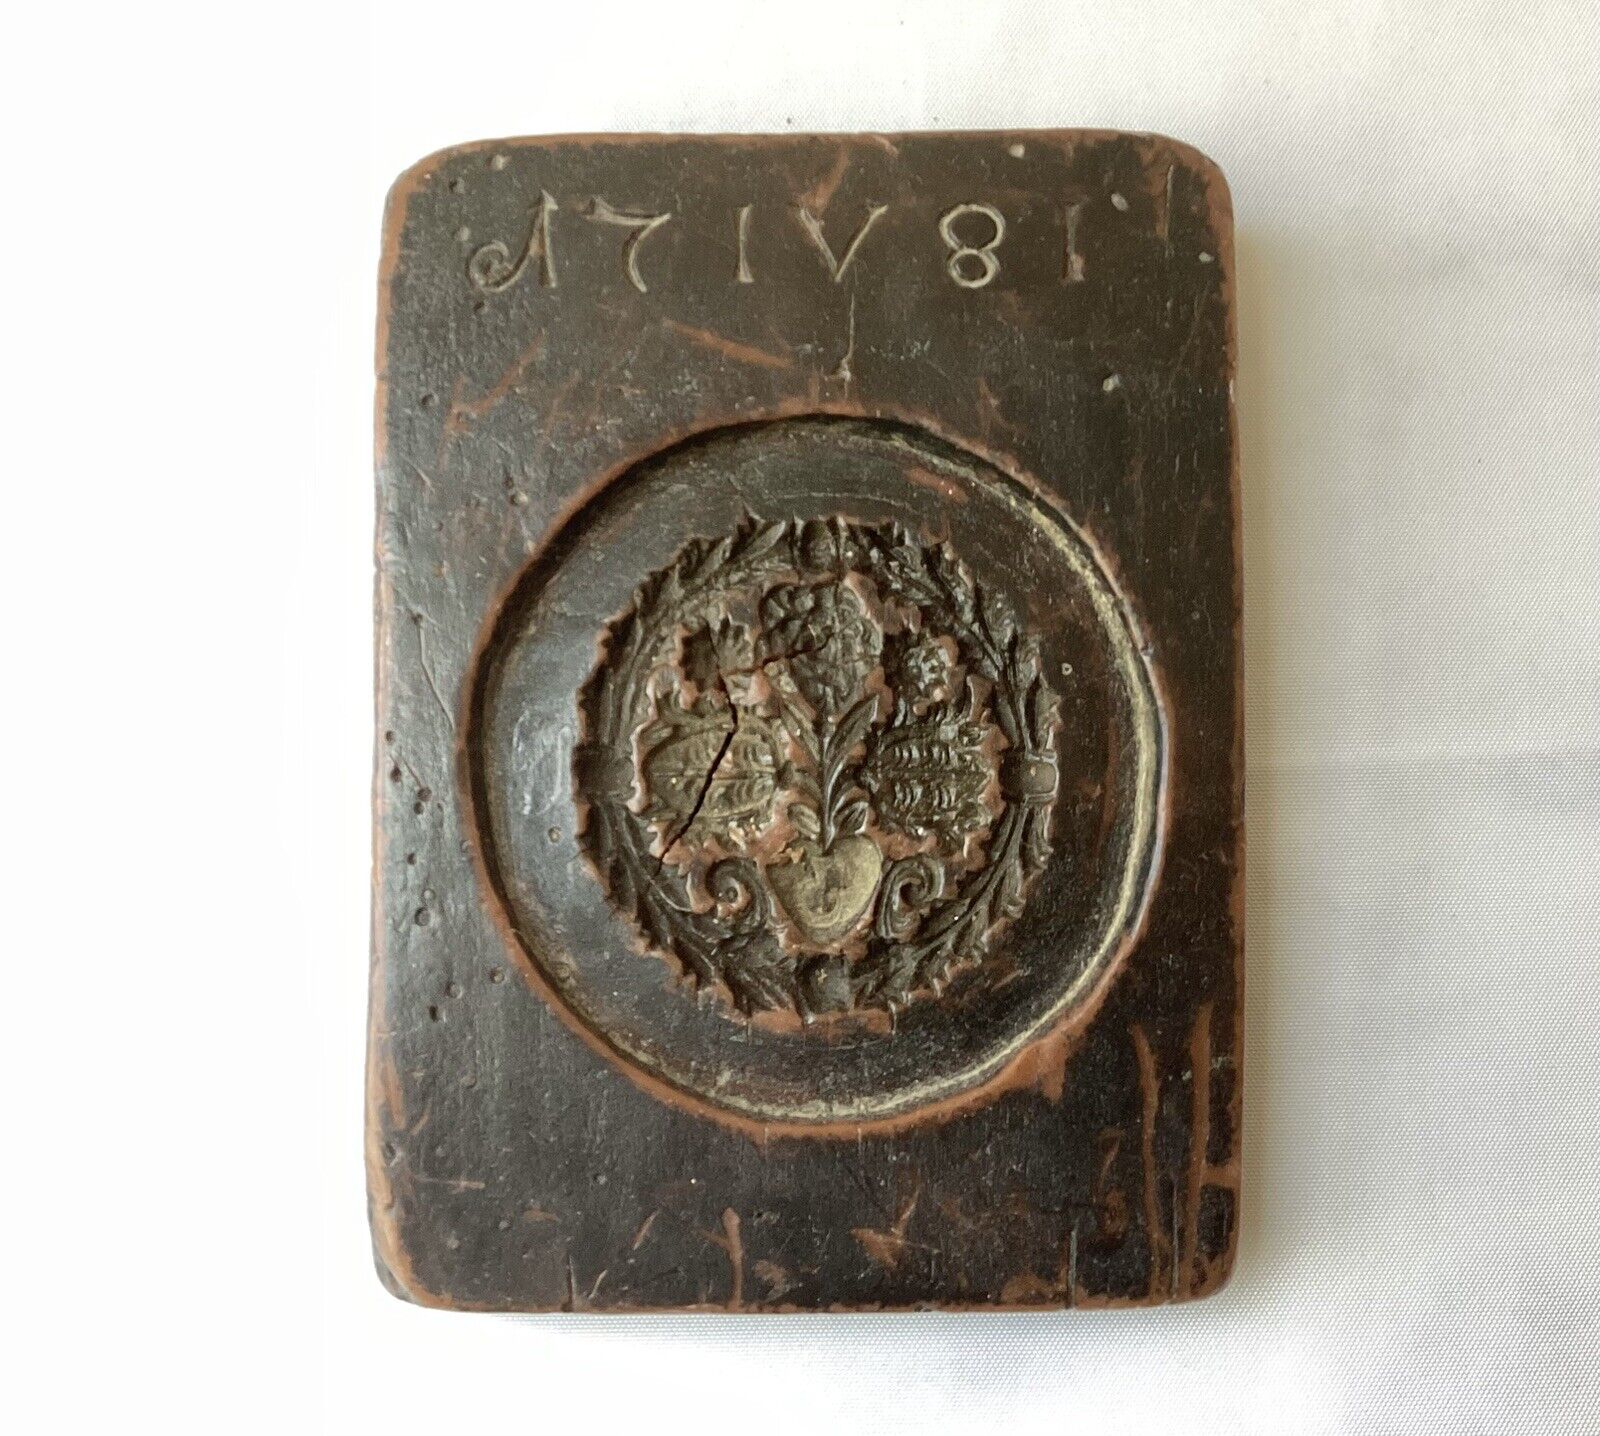 VTG Gingerbread Waxed Wooden Mold, Rosette, South Germany, Reproduction  of 1781